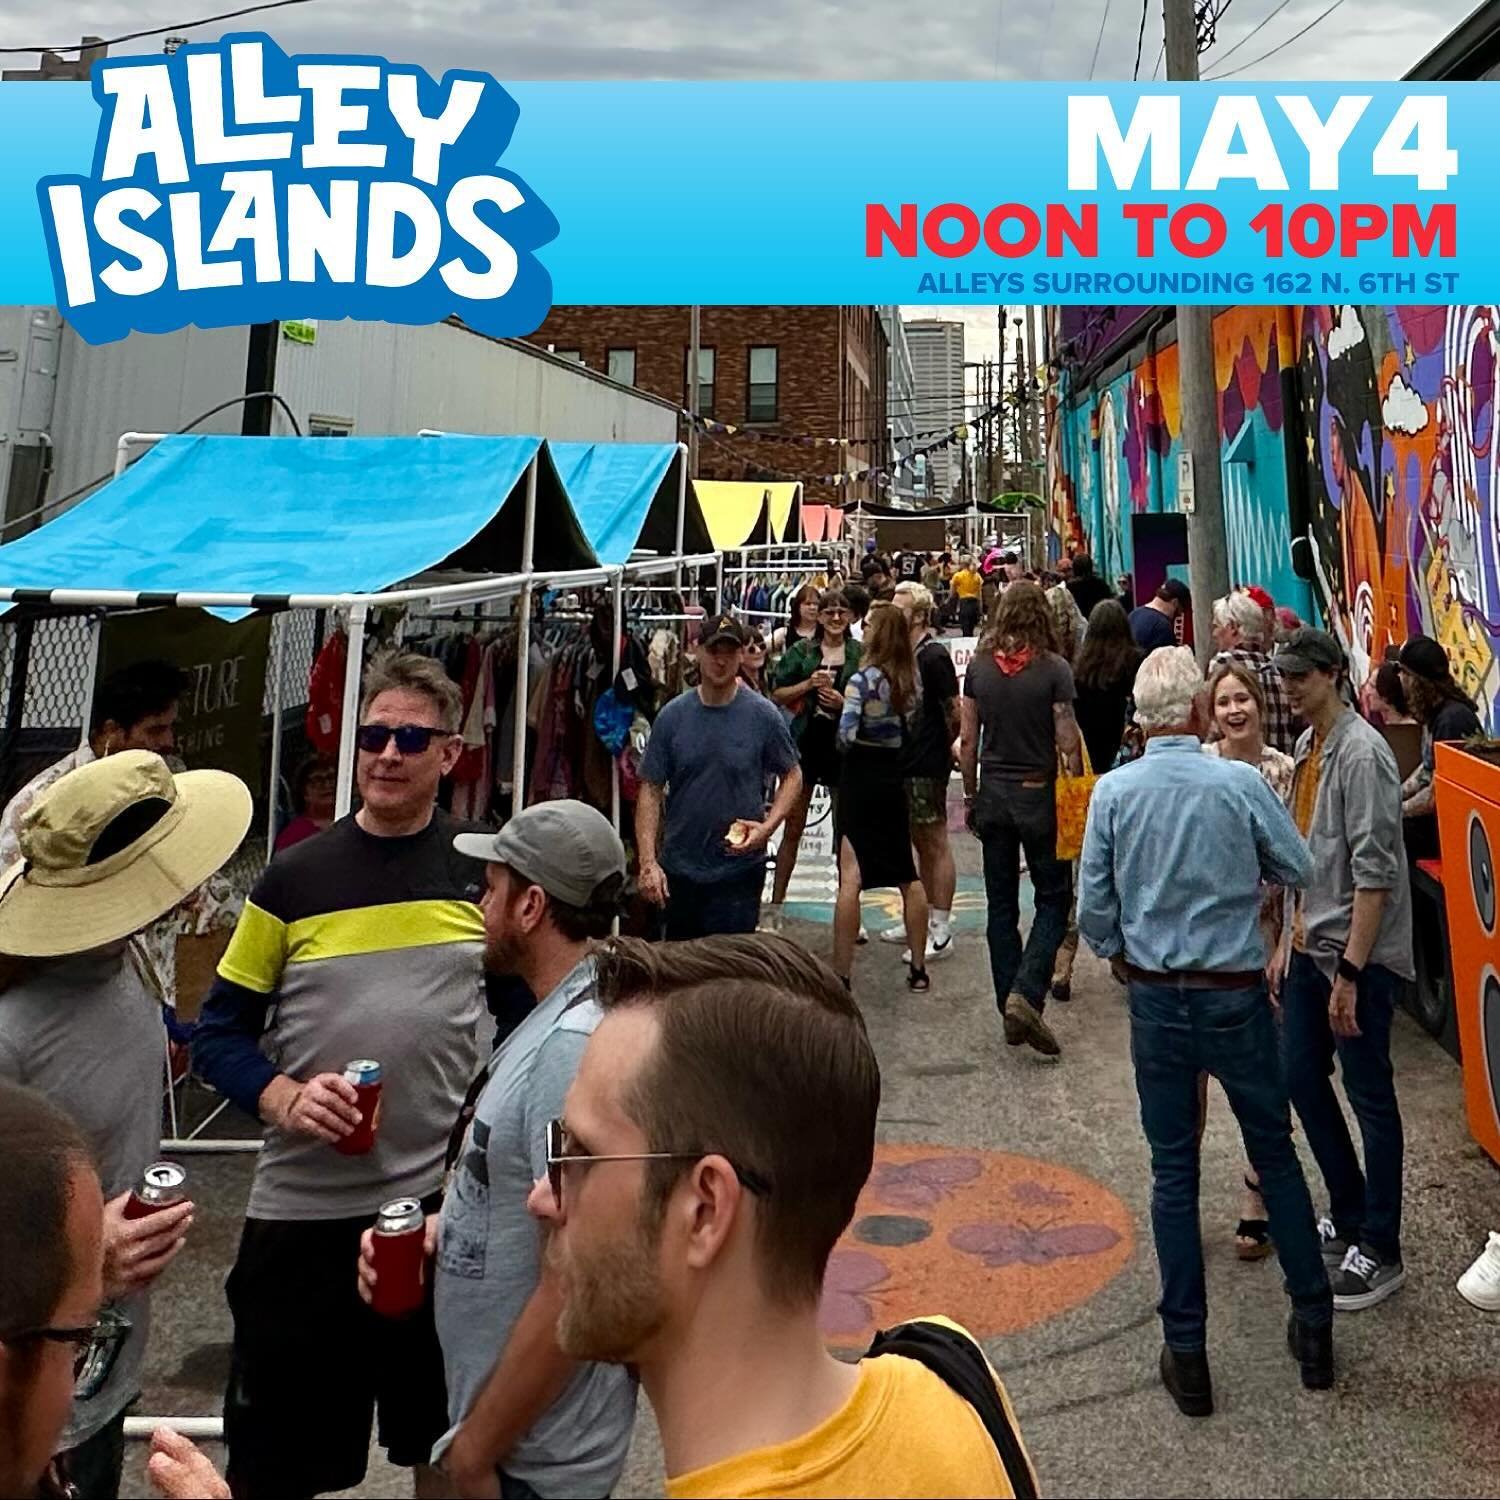 Help us make Alley Islands EPIC! Volunteer with us - click the link in profile. Please consider a shift and share with friends. The volunteer form can be found on the Alley Islands website. Thank you! 
🗣️
#alleyislands2024 #alleyislands #festivalvol